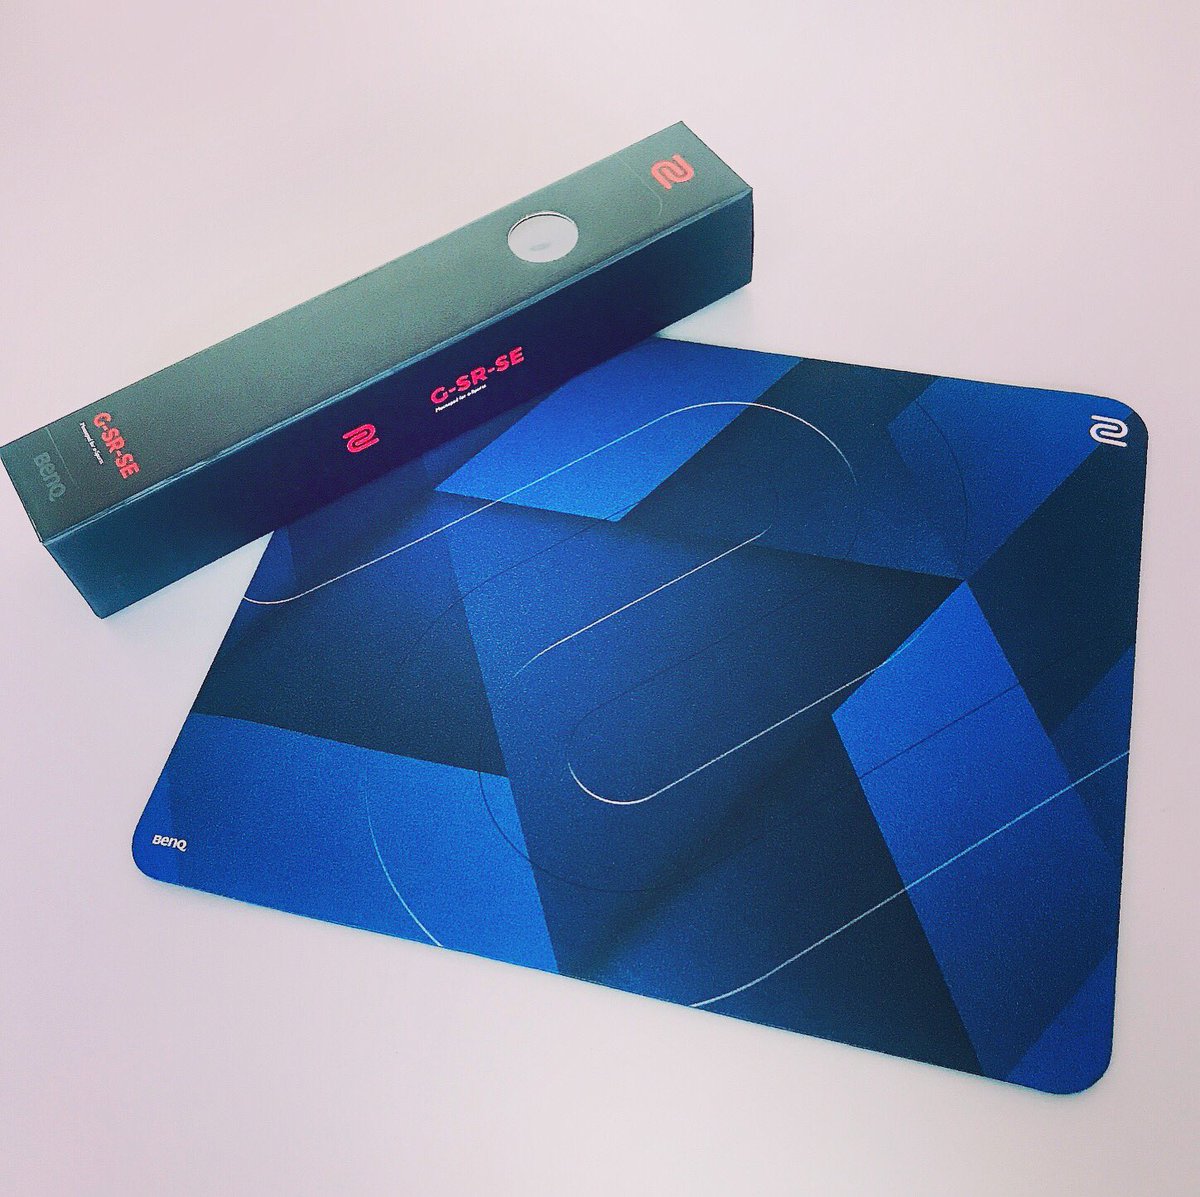 Addice Inc Zowie G Sr Se Deep Blue Is Finally Here This Is A Limited First Run So Get Yours Now Before They Re Out Of Stock T Co Ri5qng0rss T Co Hdecimn0r3